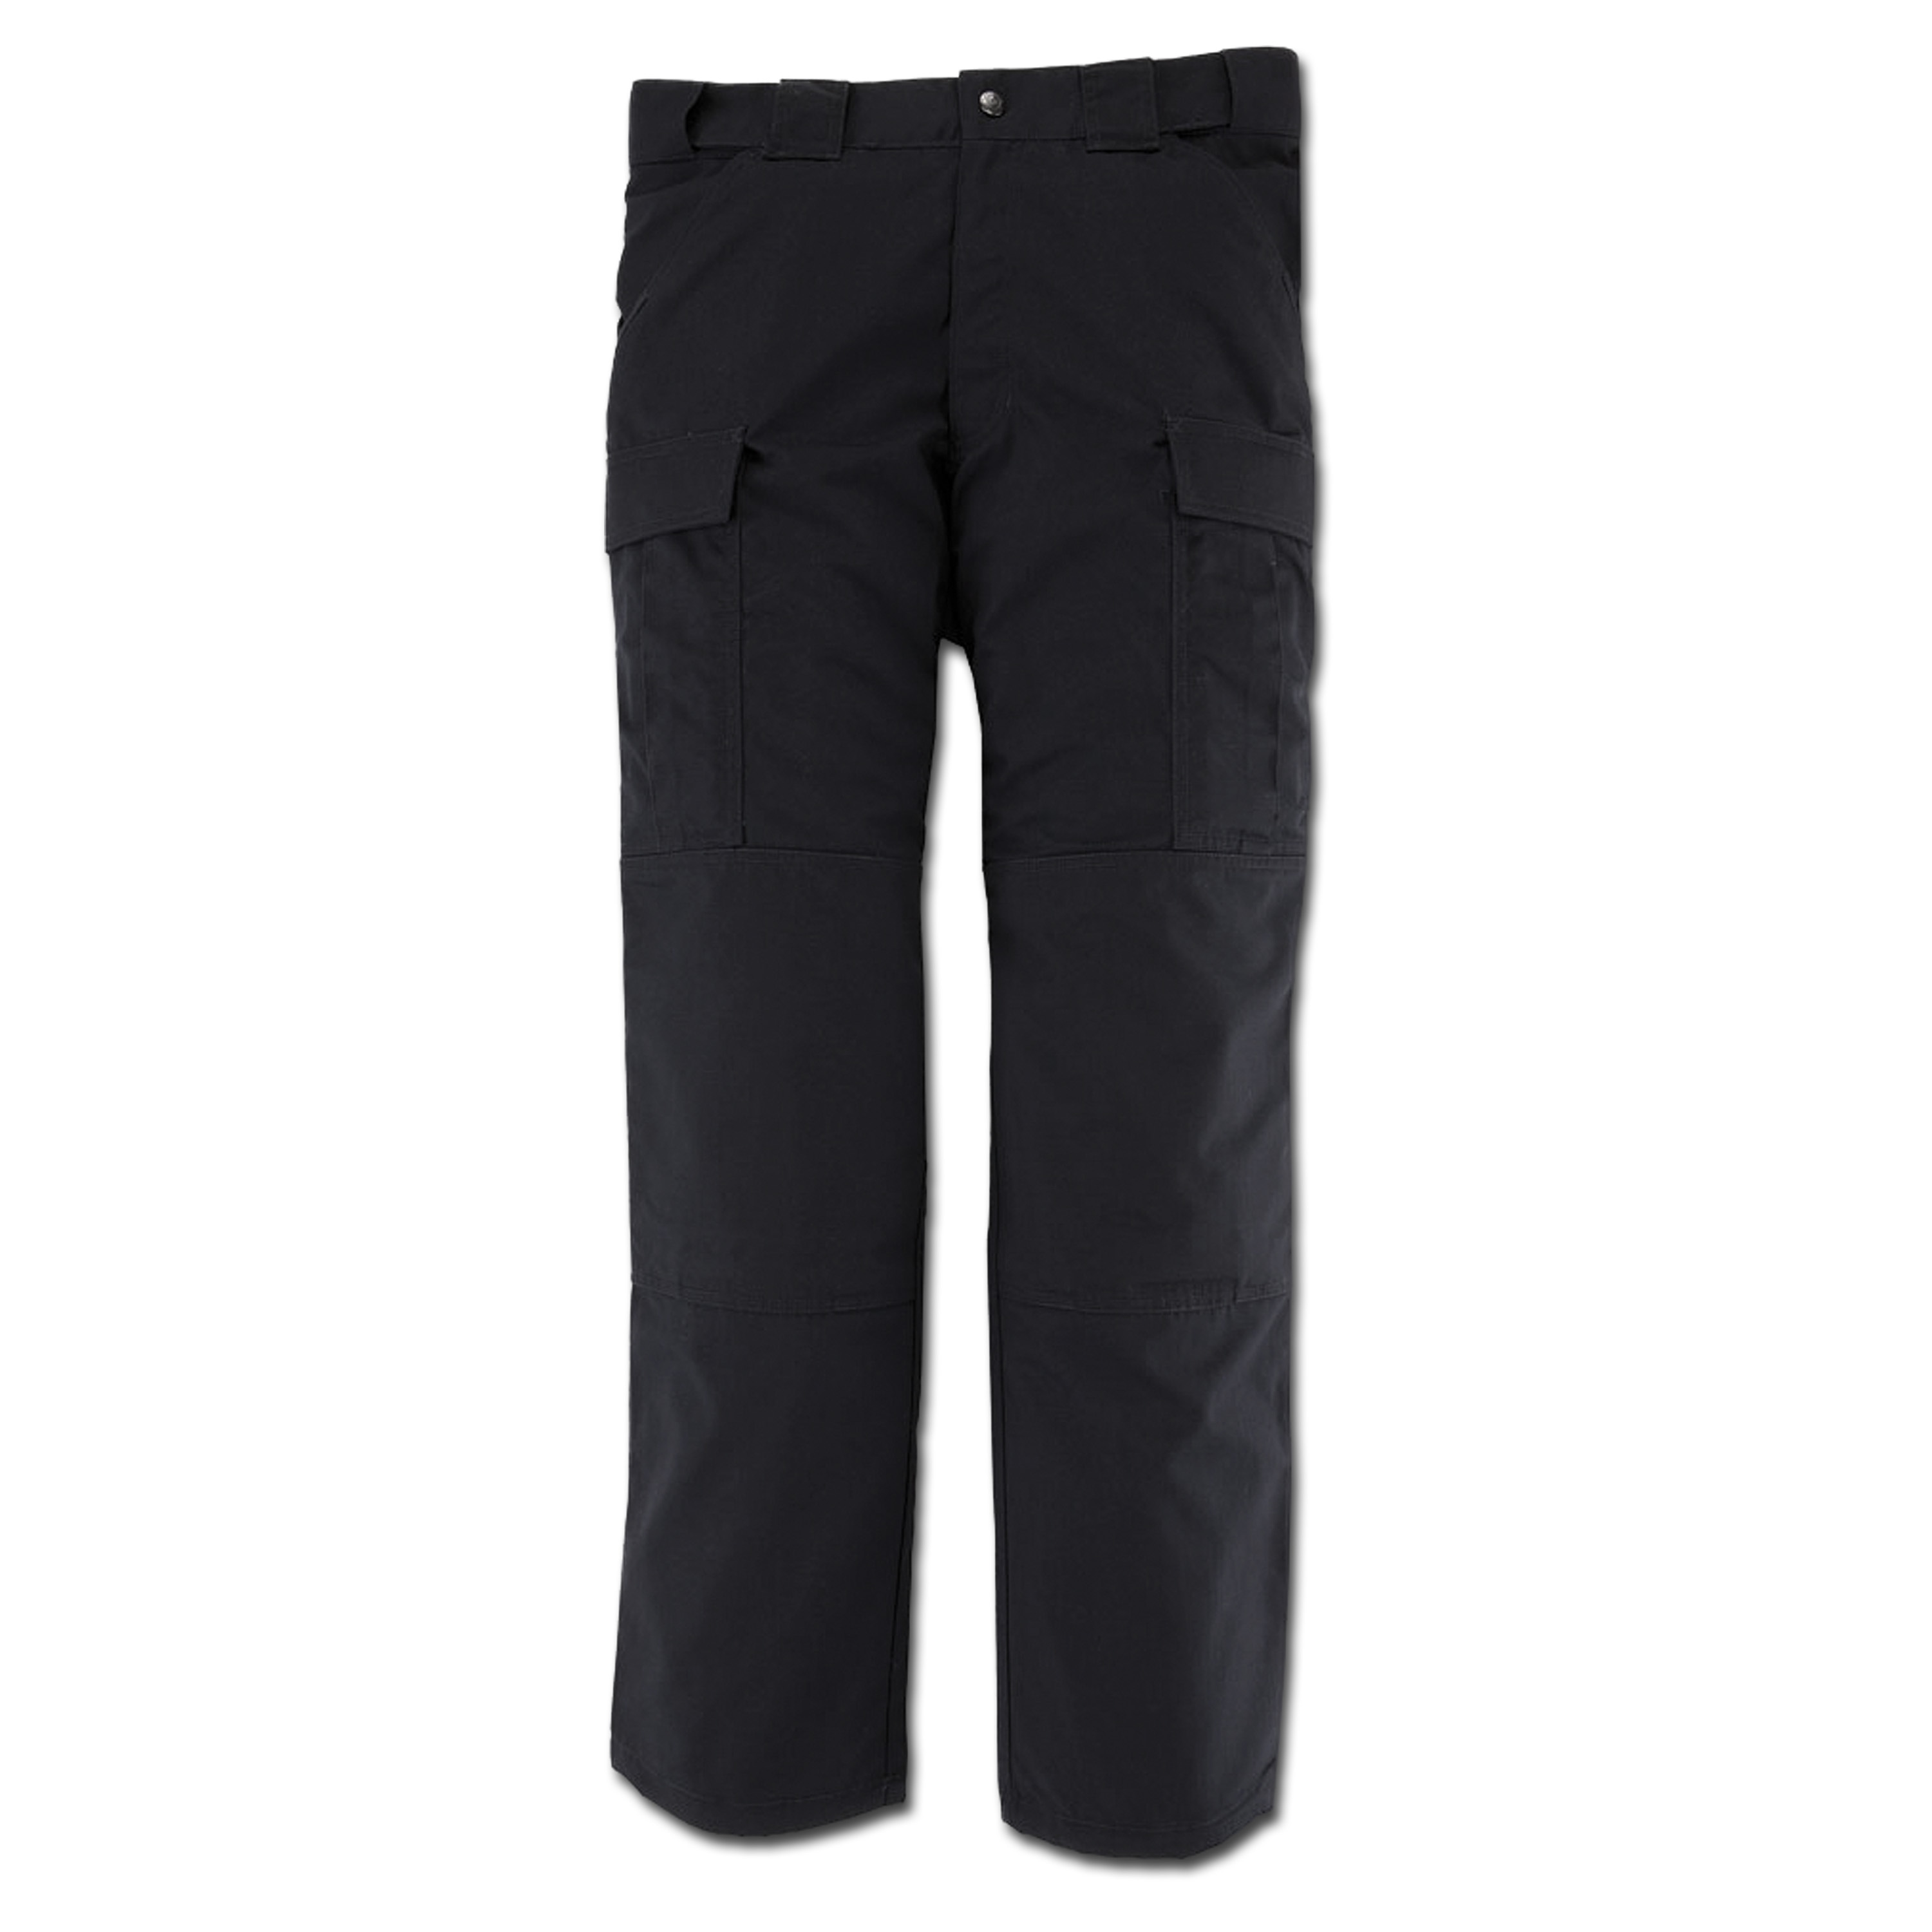 Purchase the 5.11 Ripstop TDU Pants black by ASMC